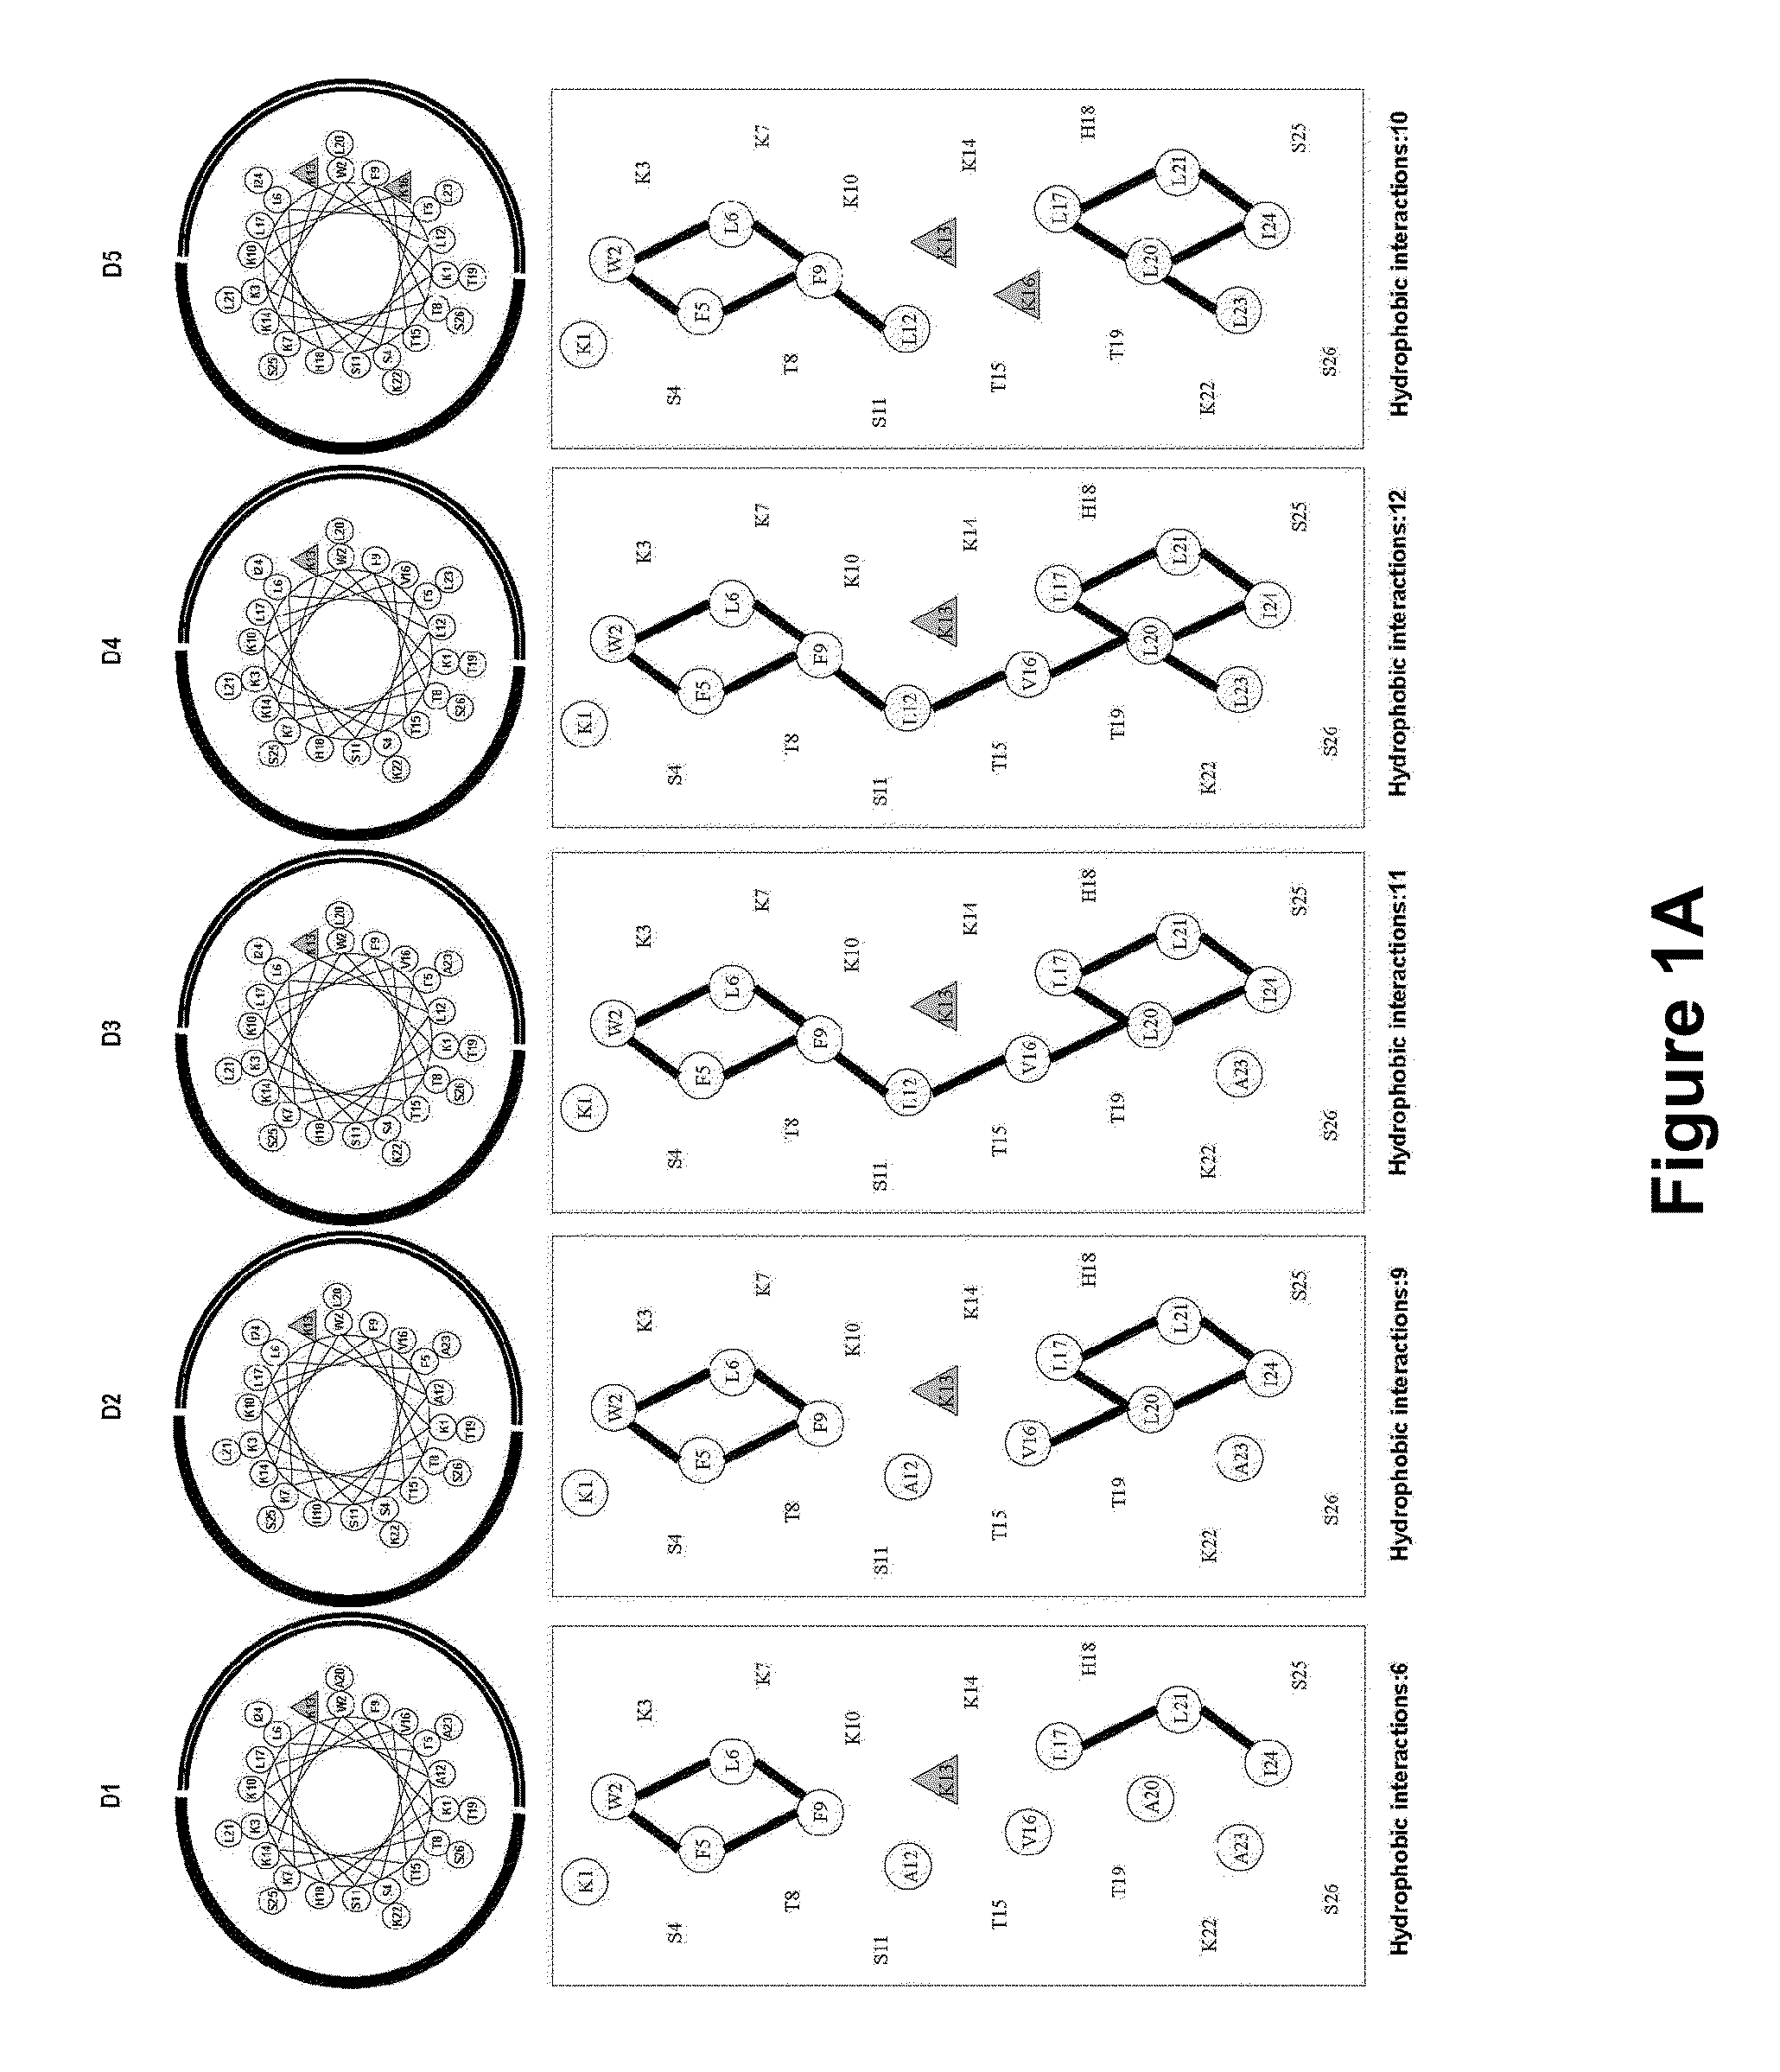 Antimicrobial Peptides and Methods of Use